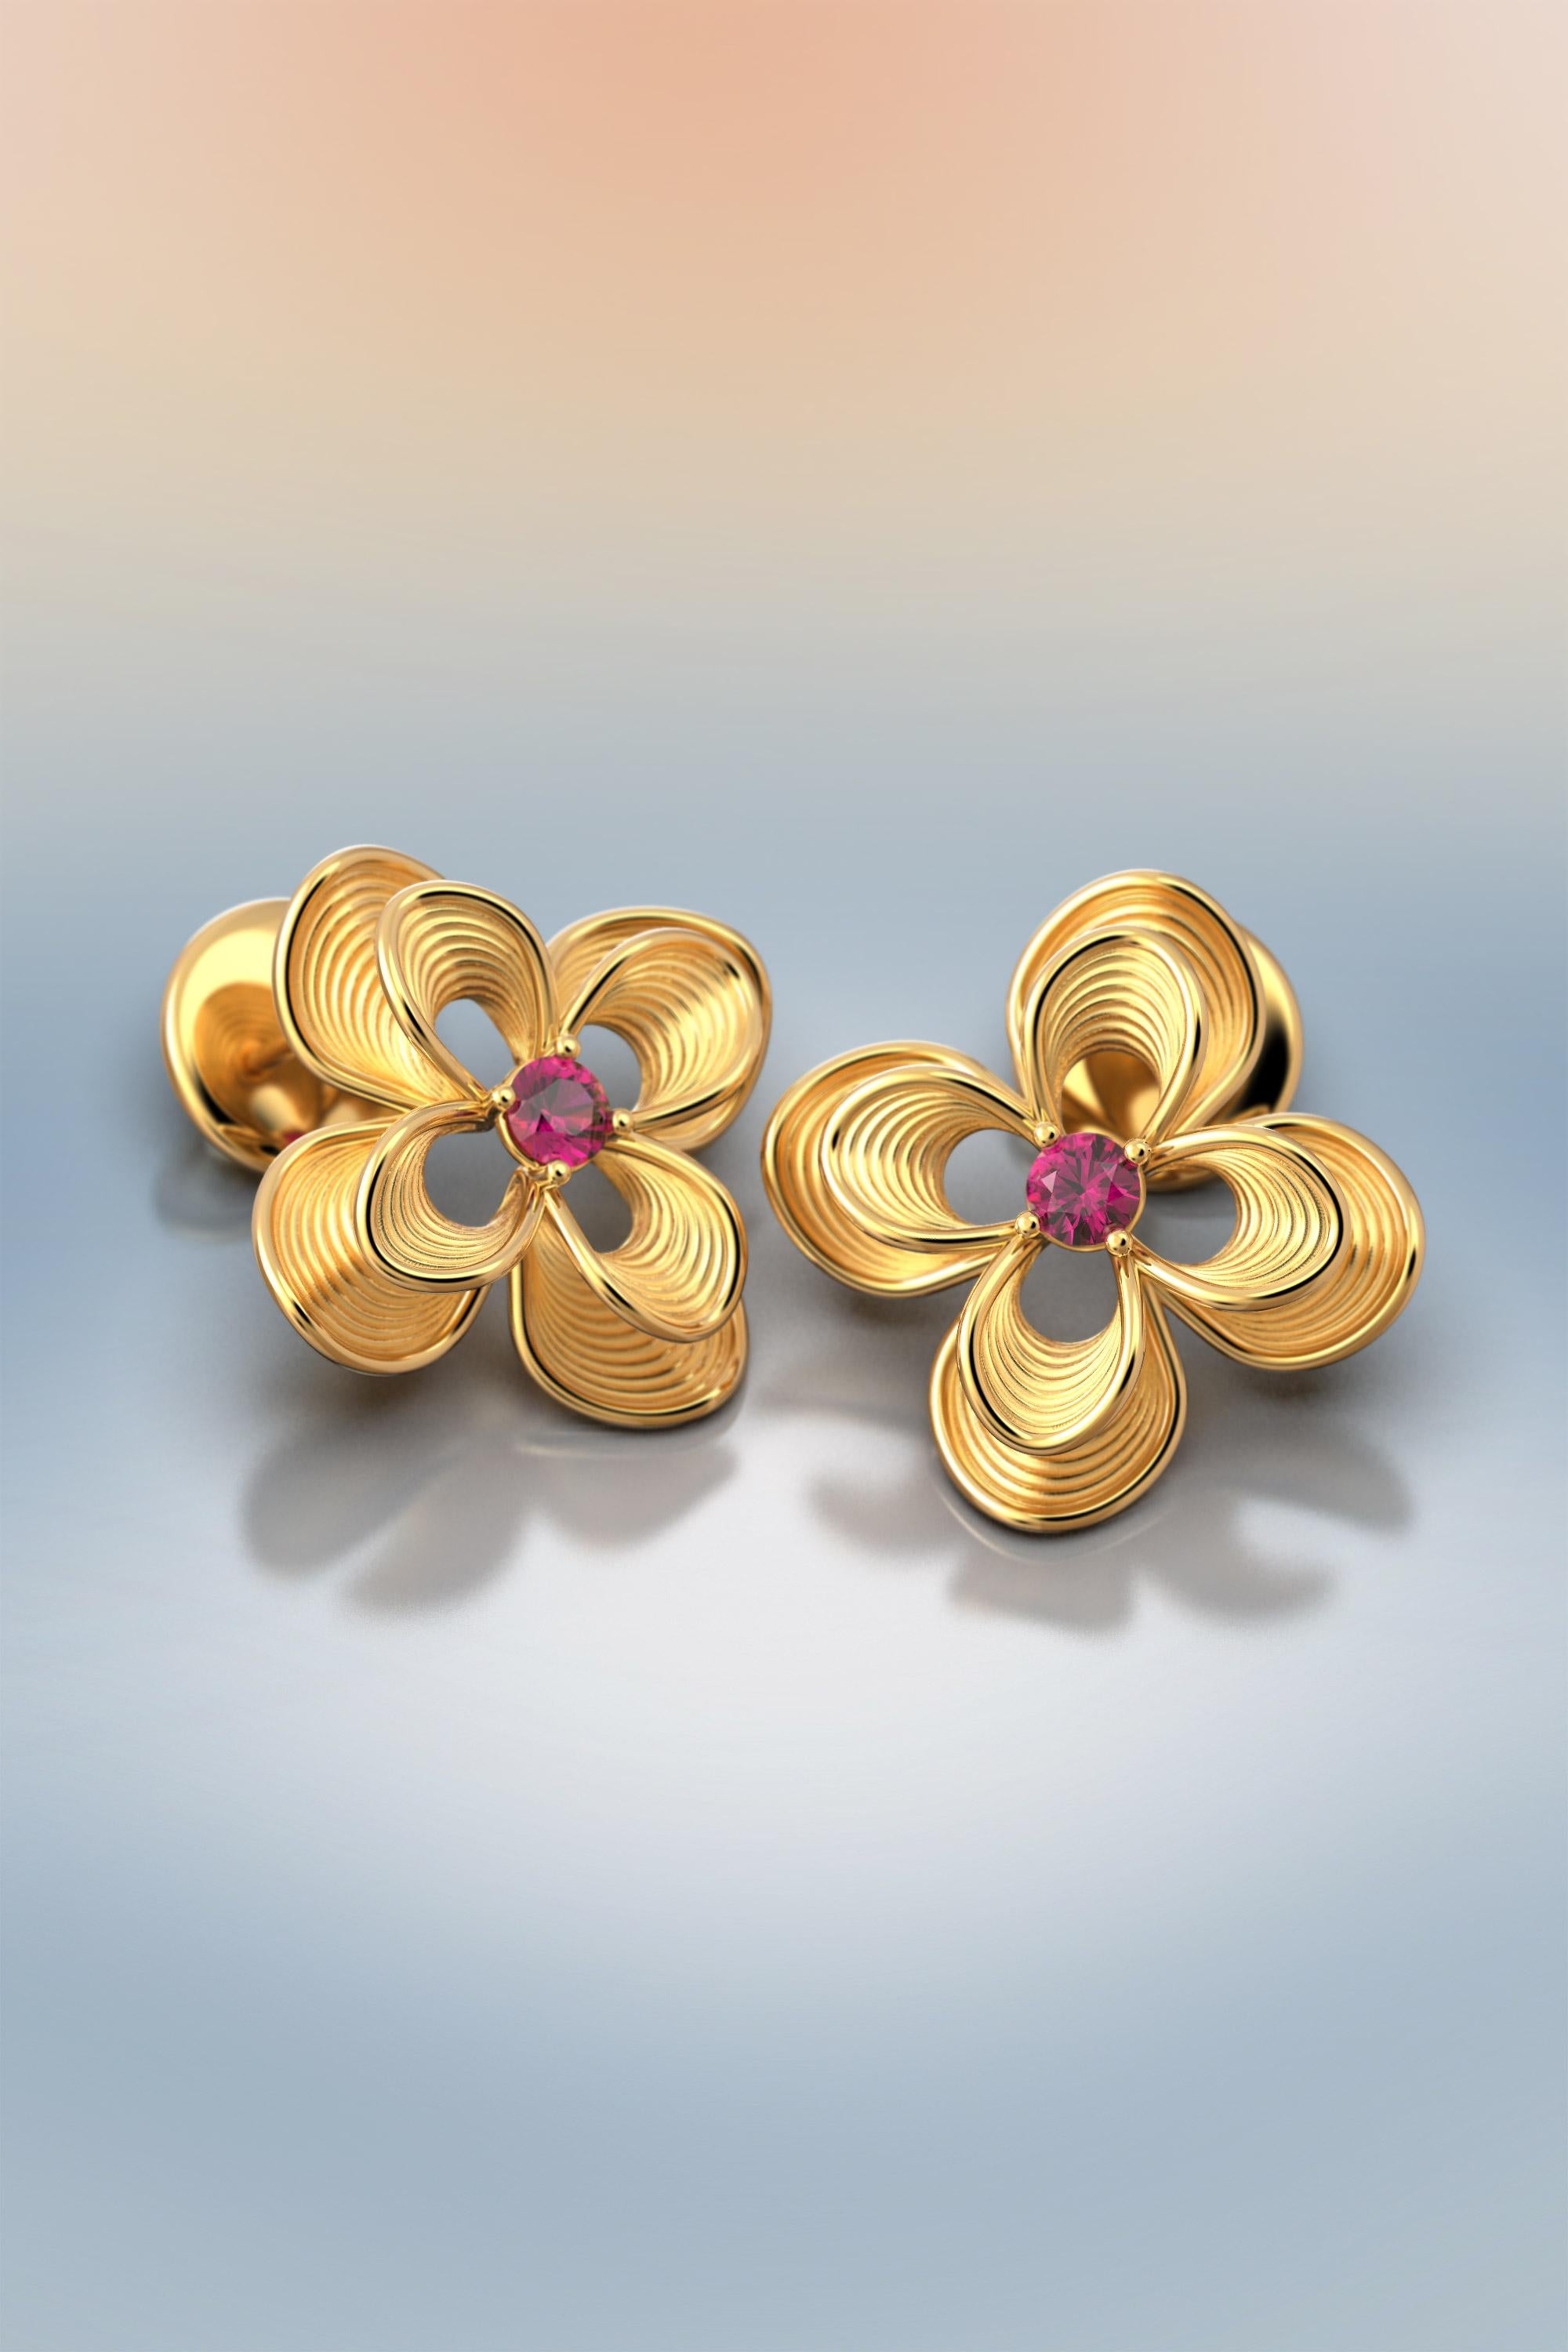 Ruby Stud Earrings in 18k Italian Gold by Oltremare Gioielli In New Condition For Sale In Camisano Vicentino, VI